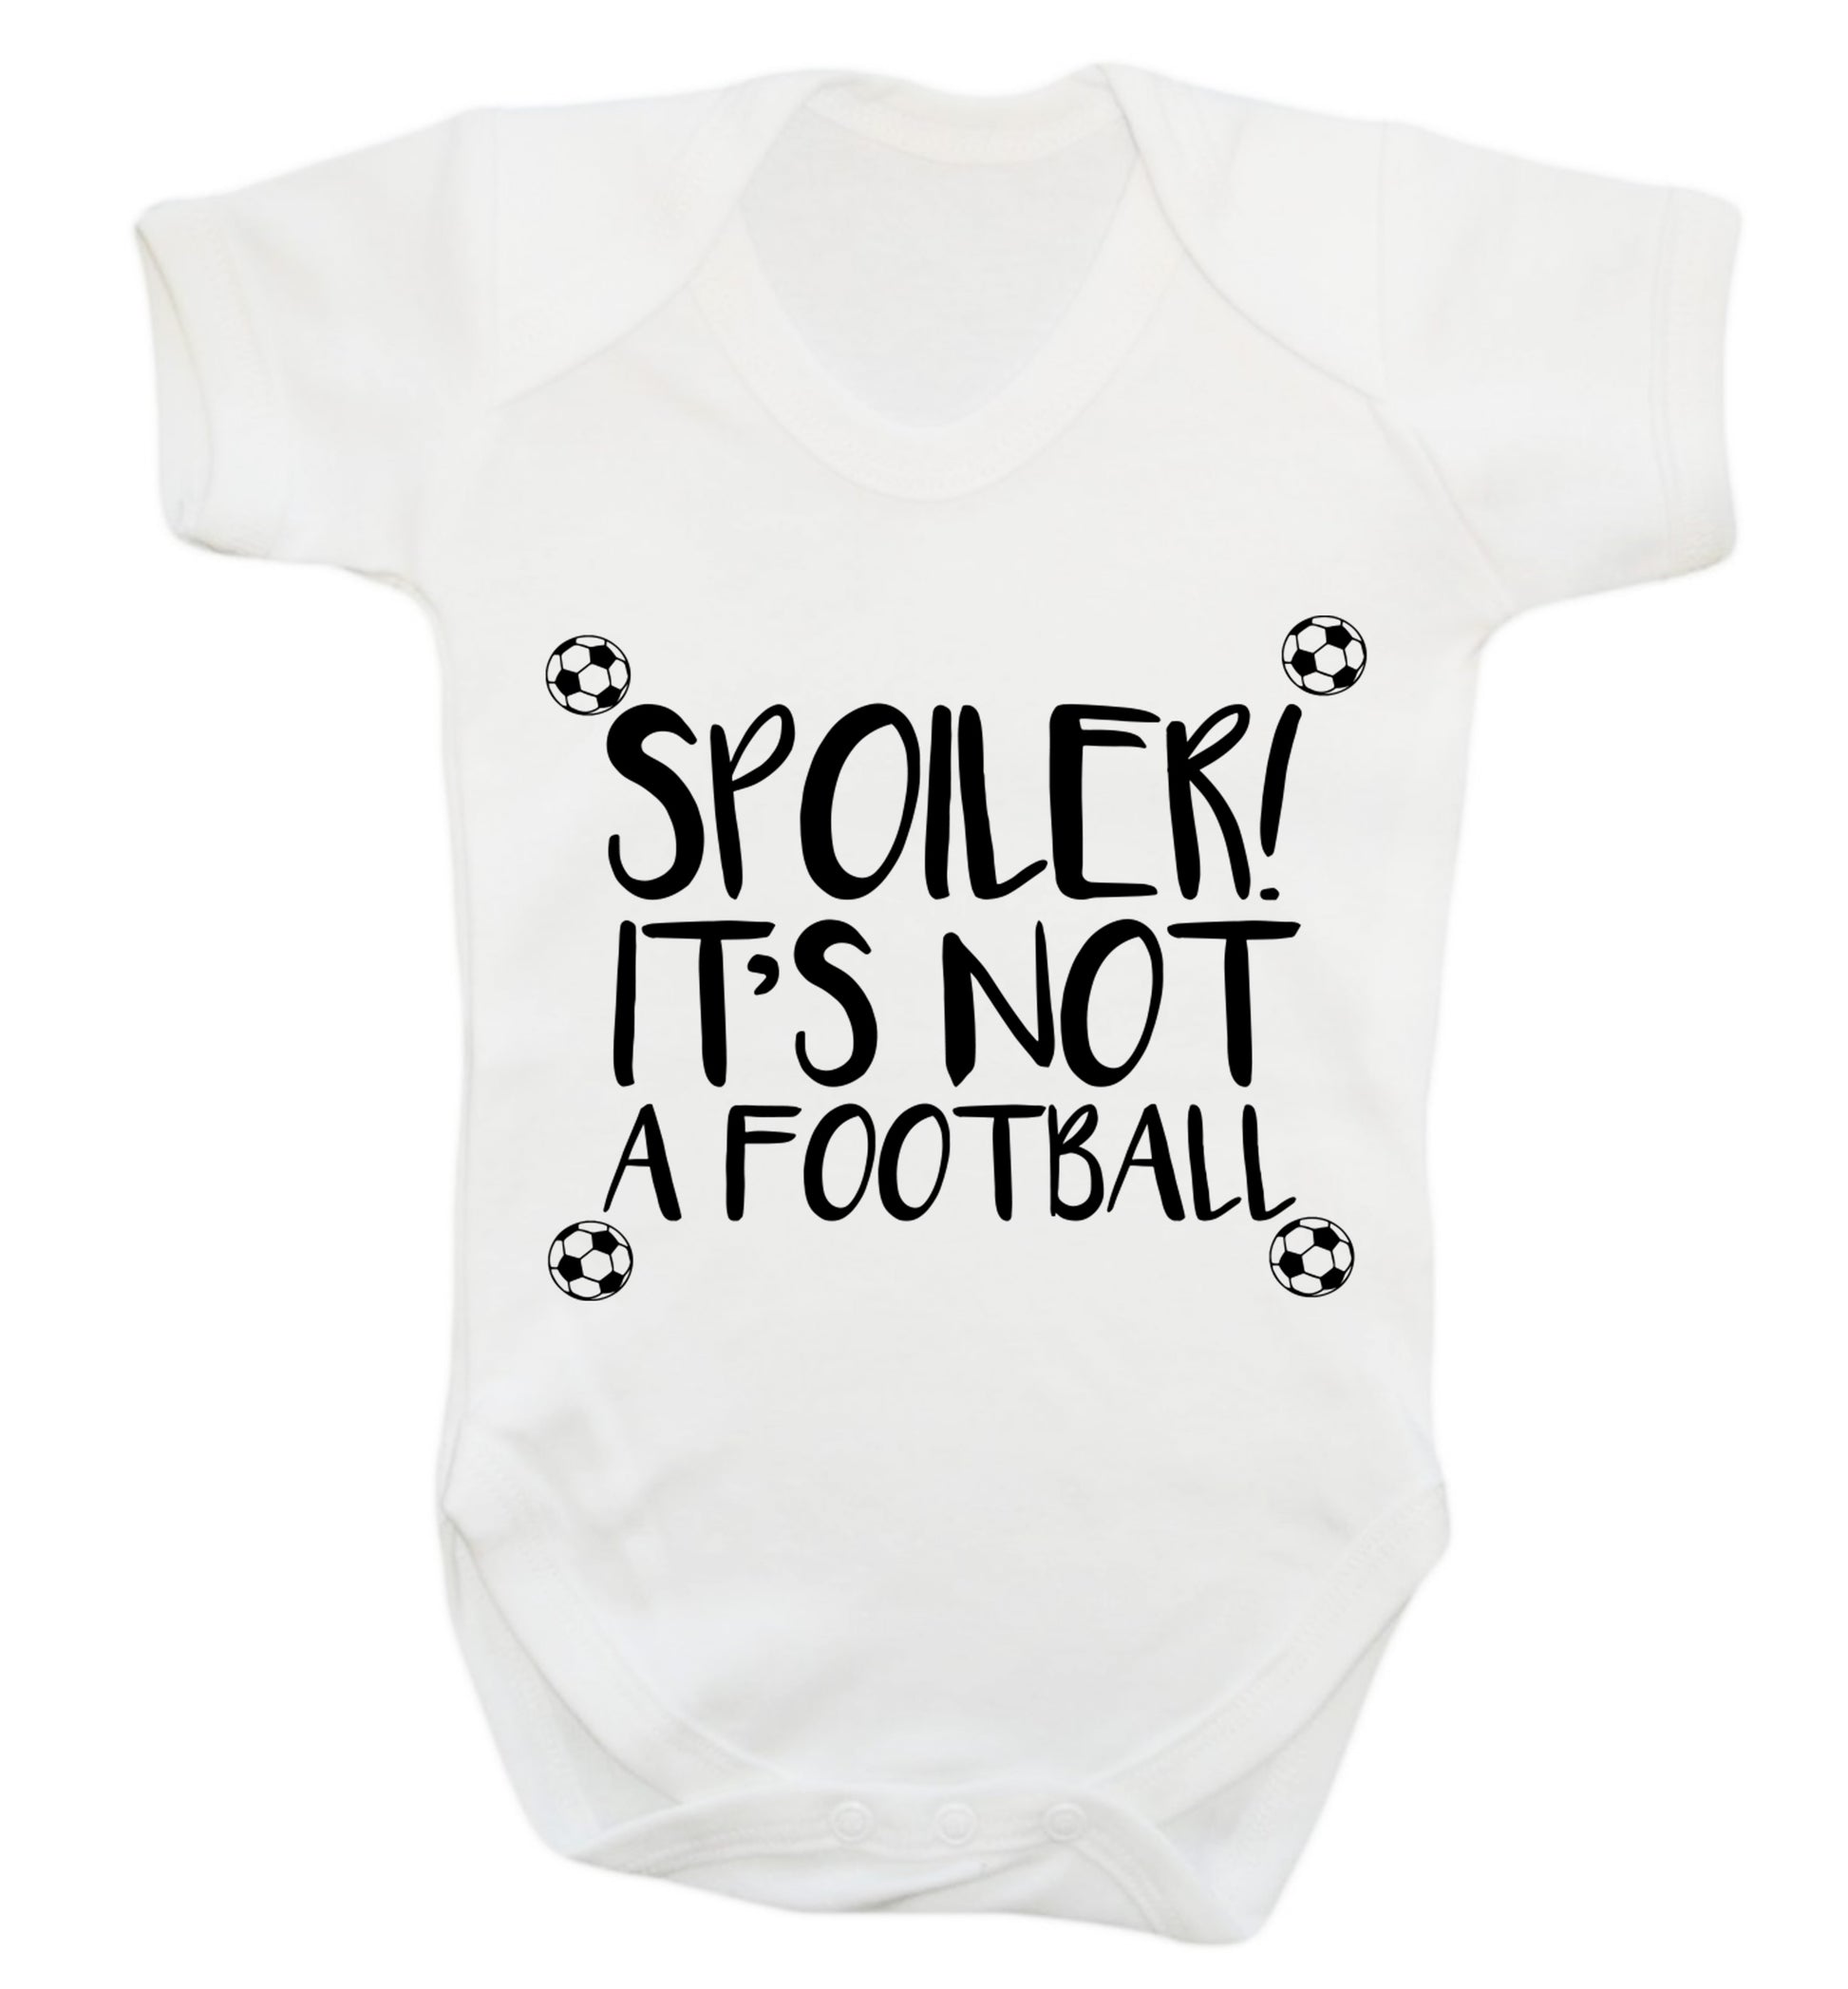 Spoiler it's not a football Baby Vest white 18-24 months